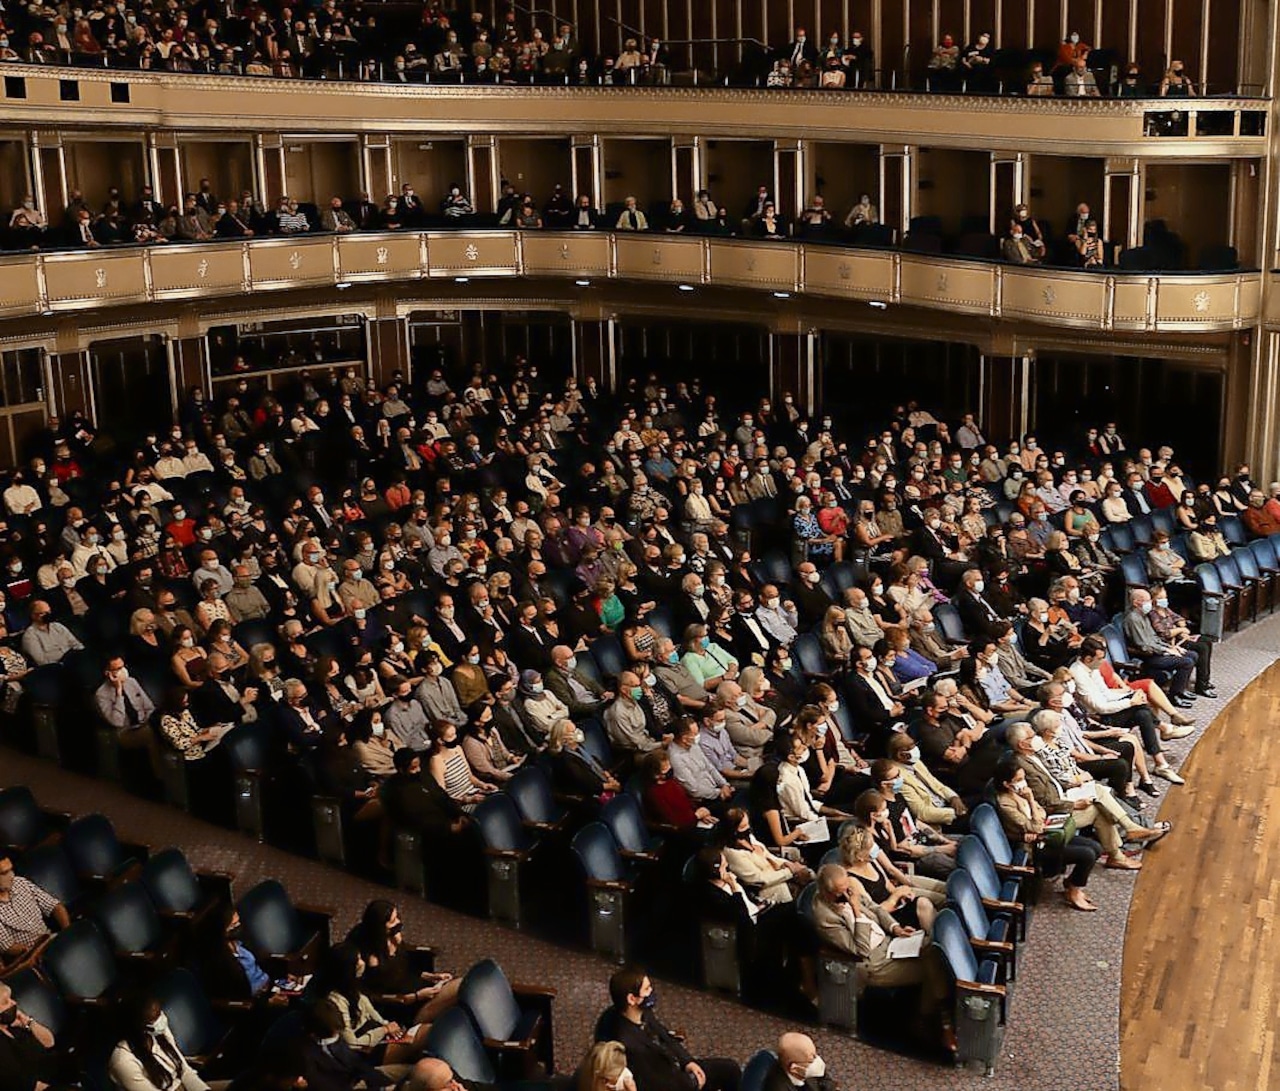 Severance Hall usher left me stranded without my rollator, a potential safety issue [Video]